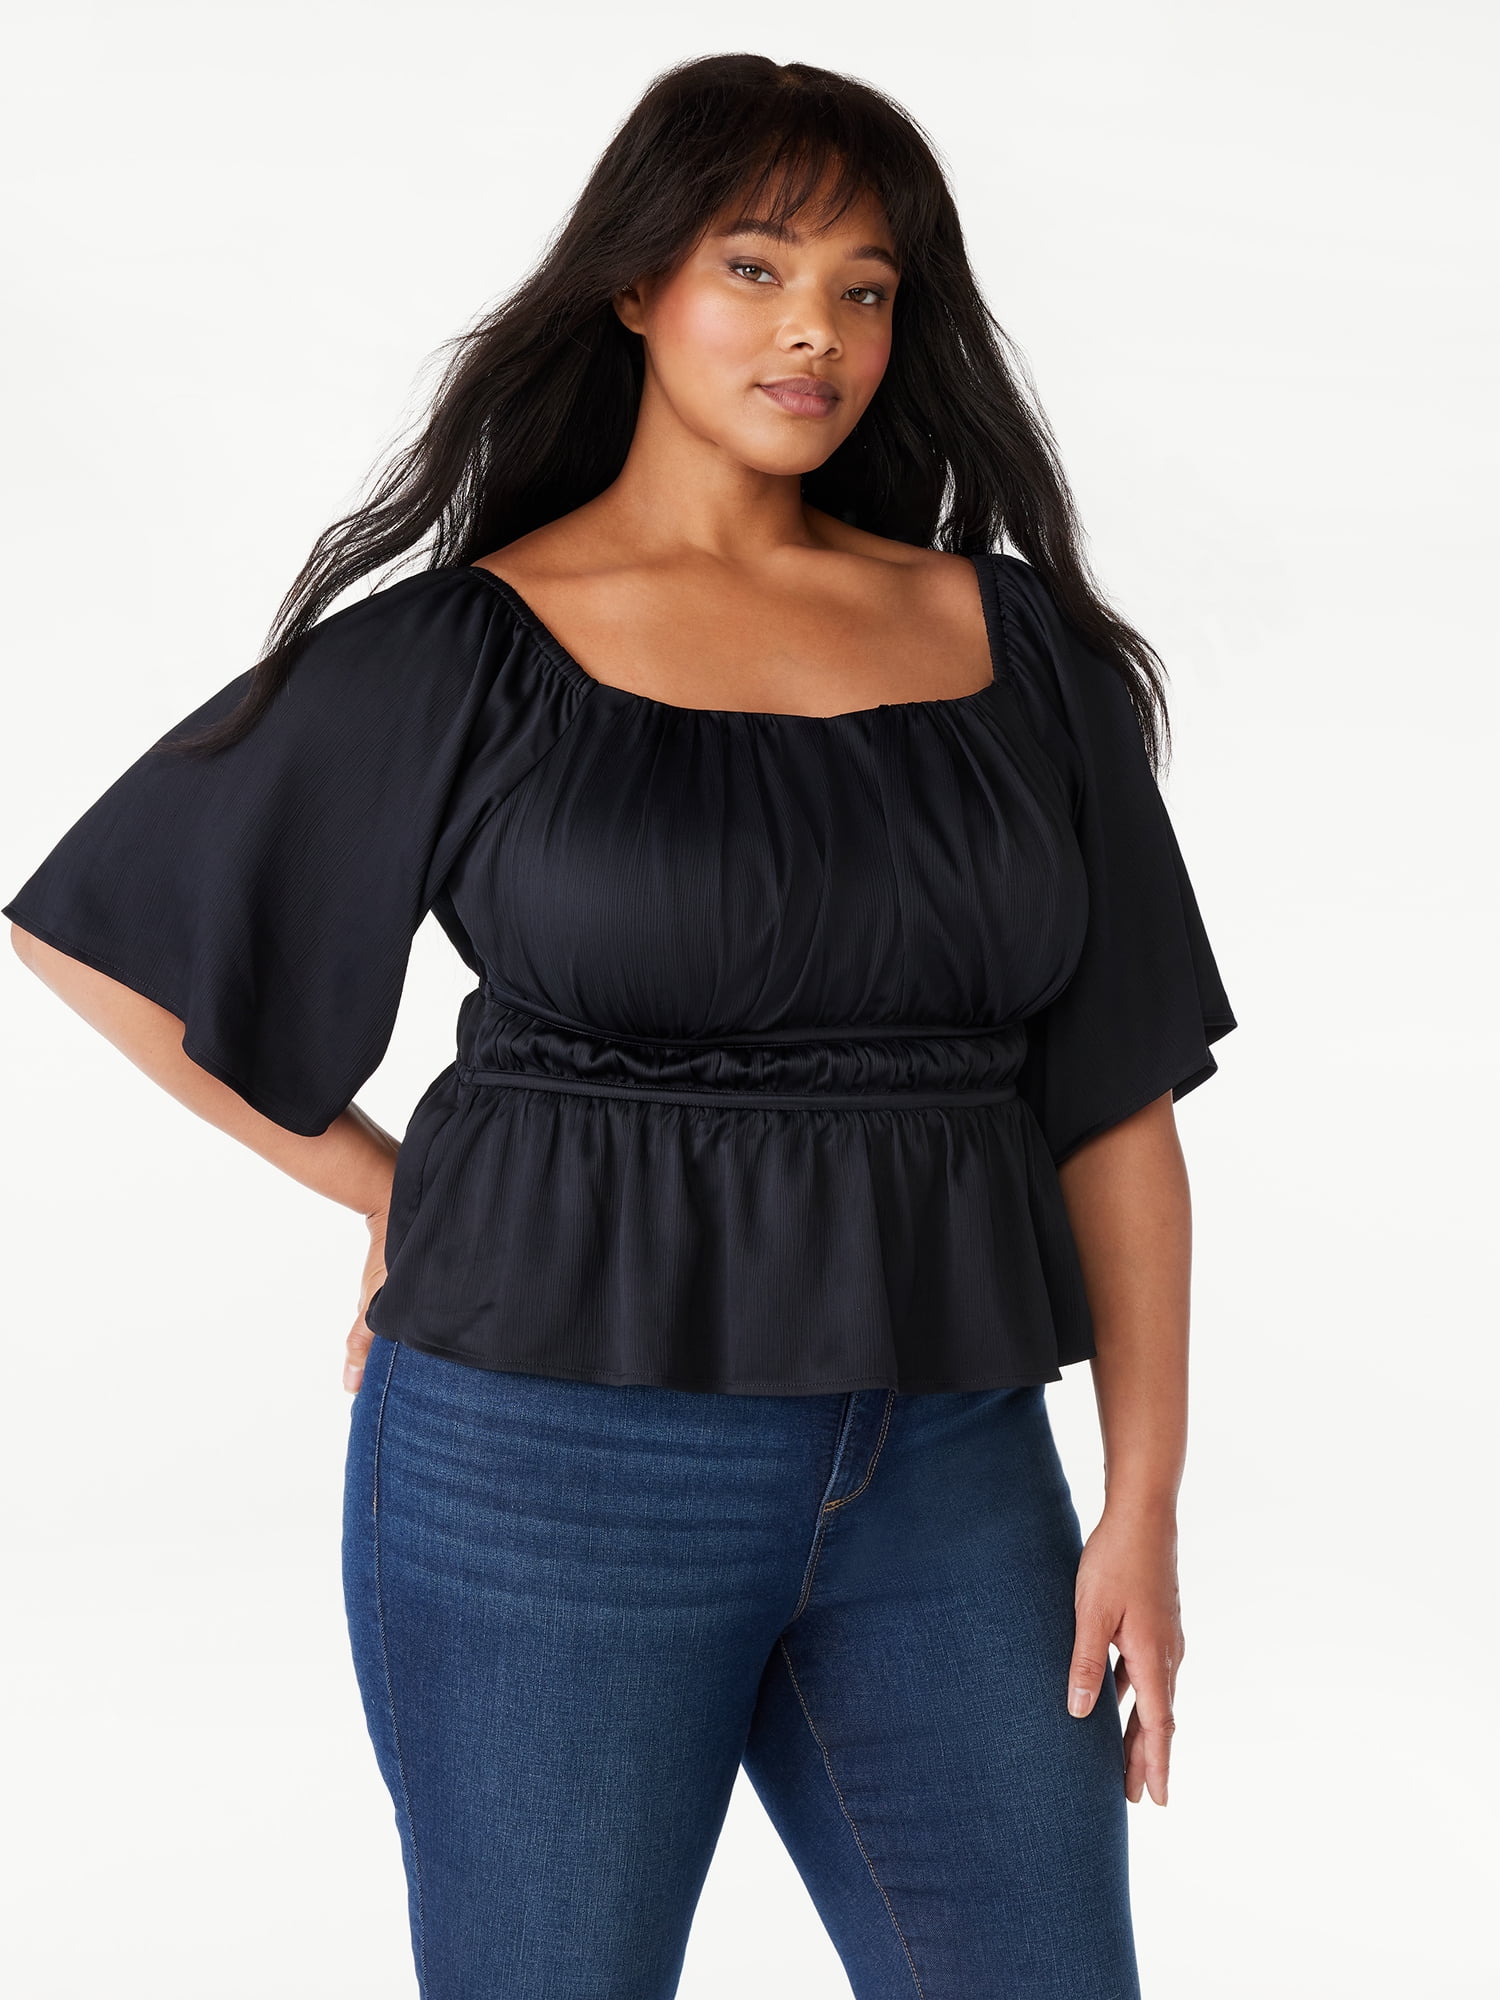 Sofia Jeans Women's Plus Size Peplum Top with Bell Sleeves, Sizes 1X-5X ...